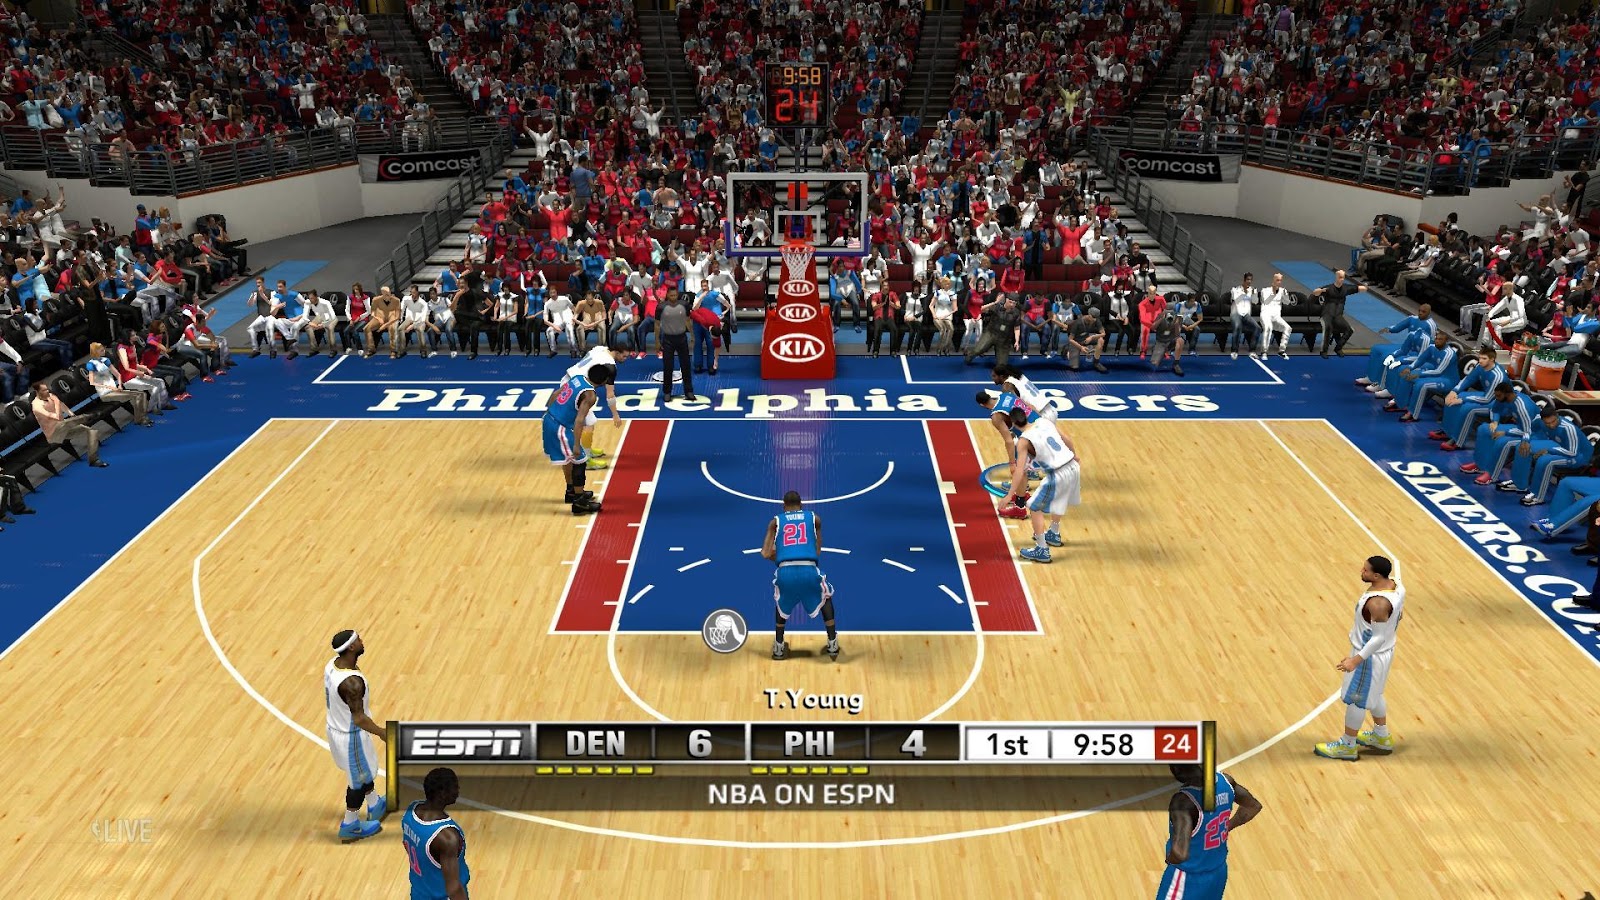 nba basketball games free download for laptop